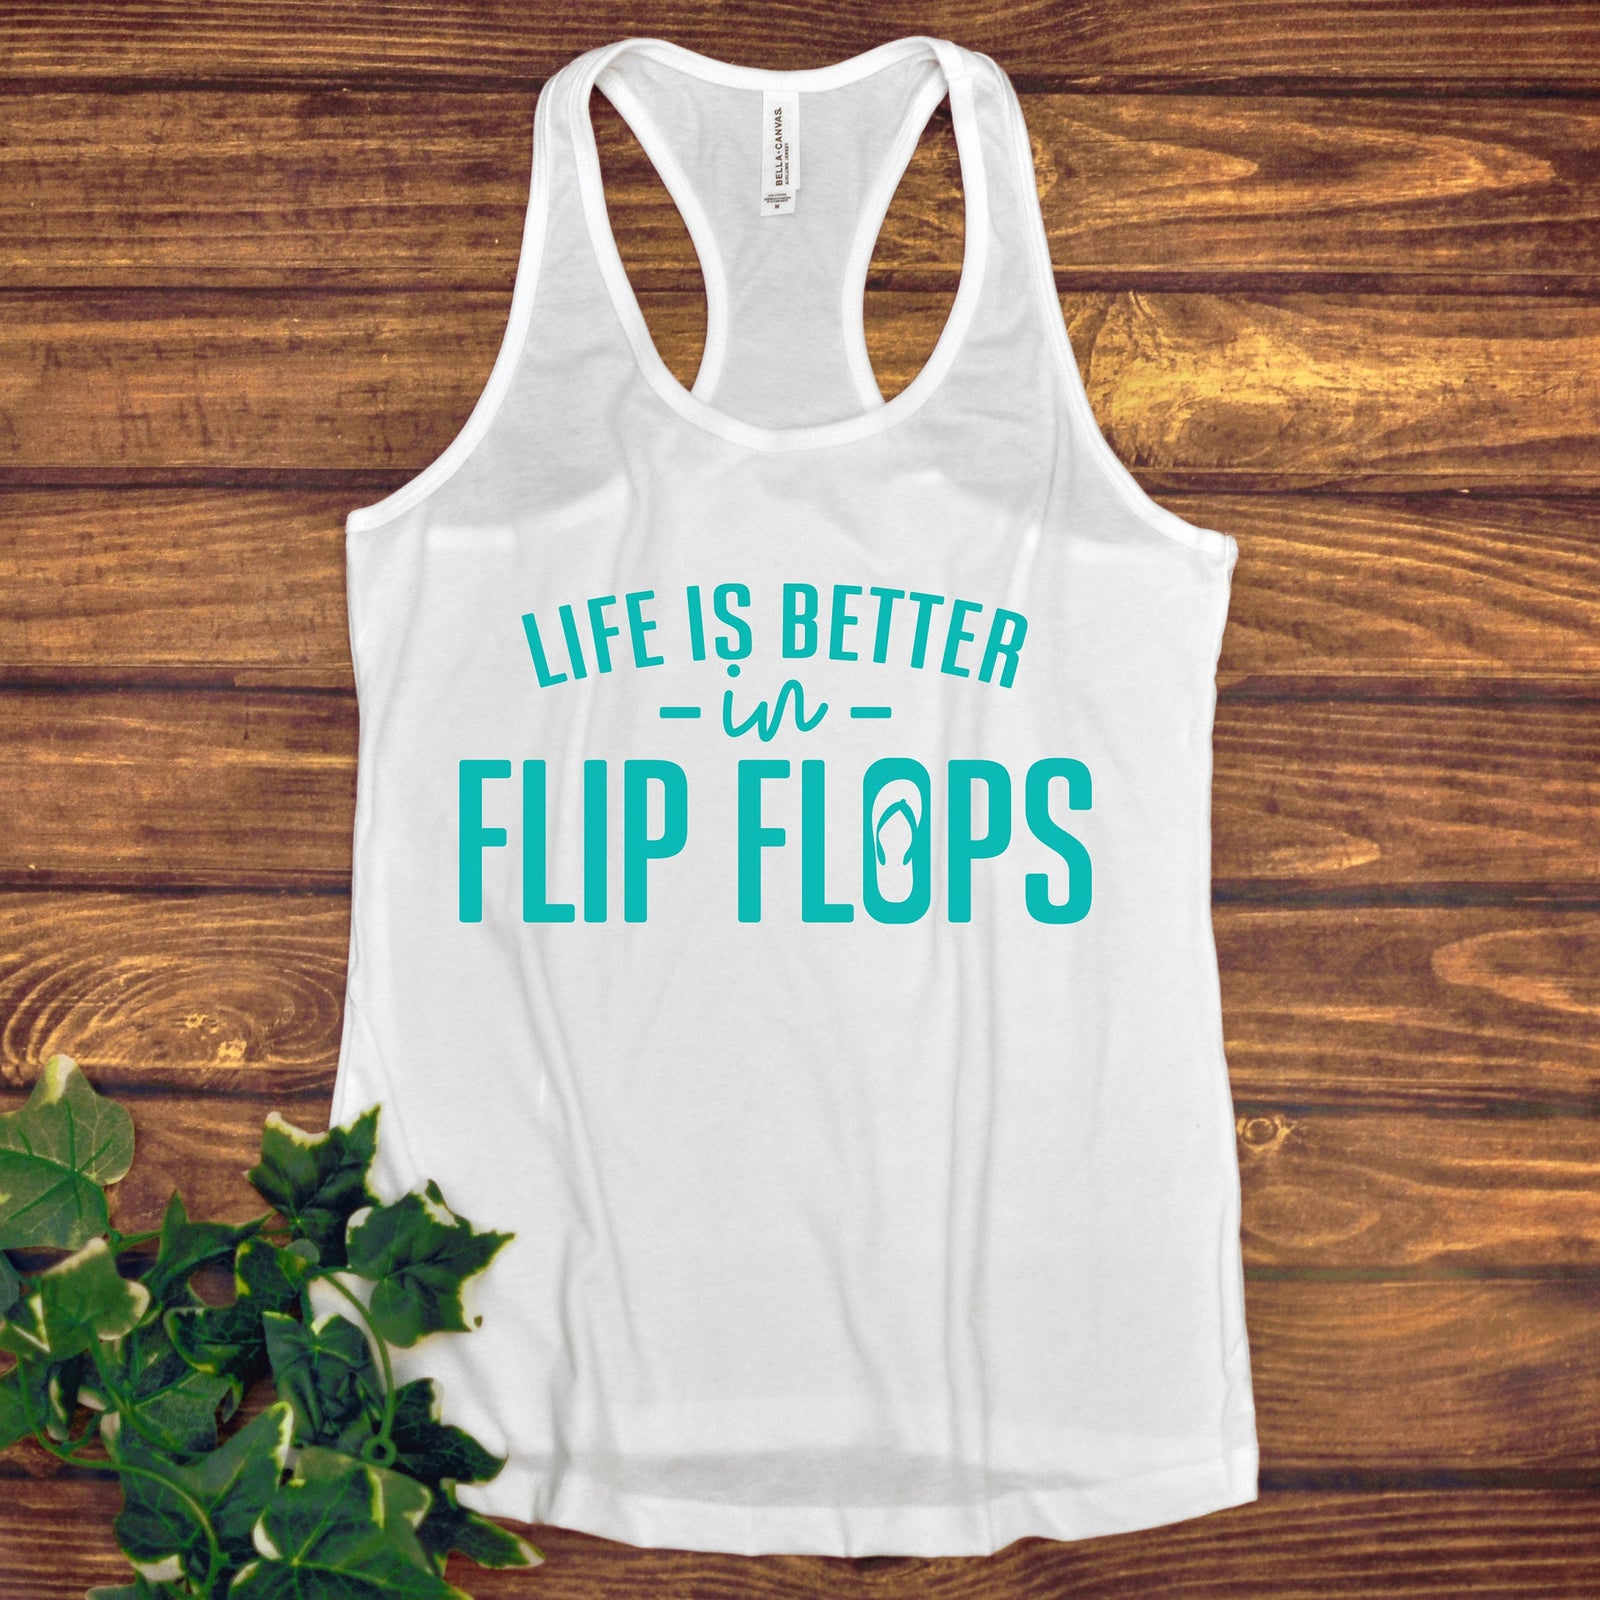 Life is Better in Flip Flops Ladies Tank Top - Beach Wear - Vacation - Family Matching Group Pictures - Summertime